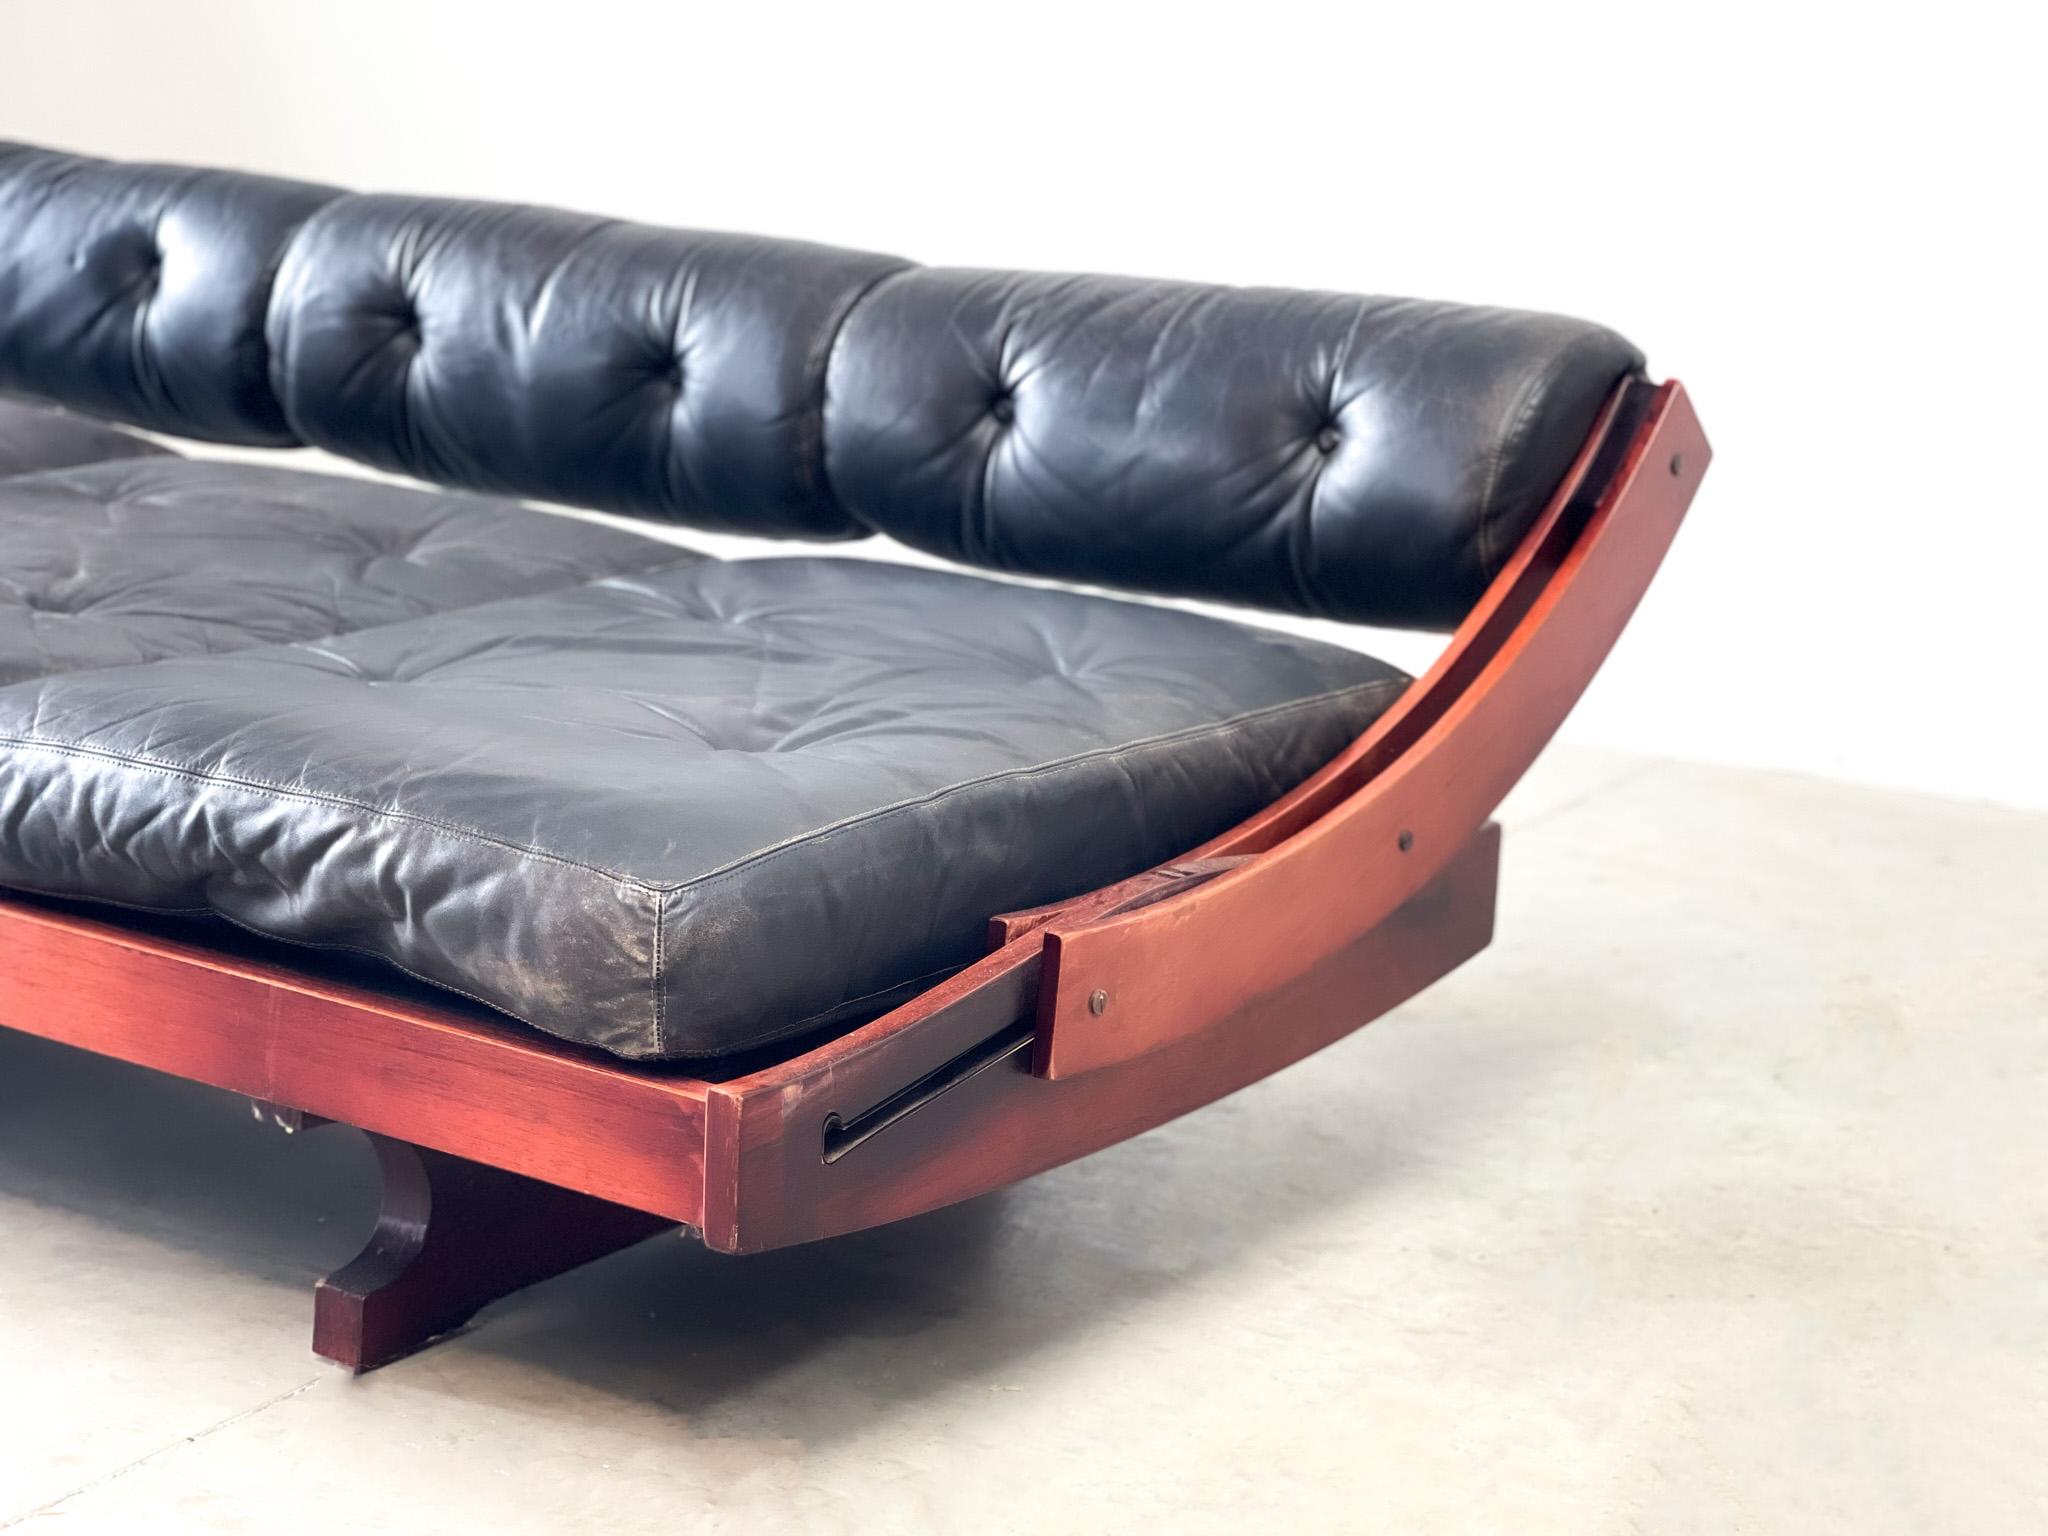 GS195 black leather sofa or daybed by Gianni Songia 1